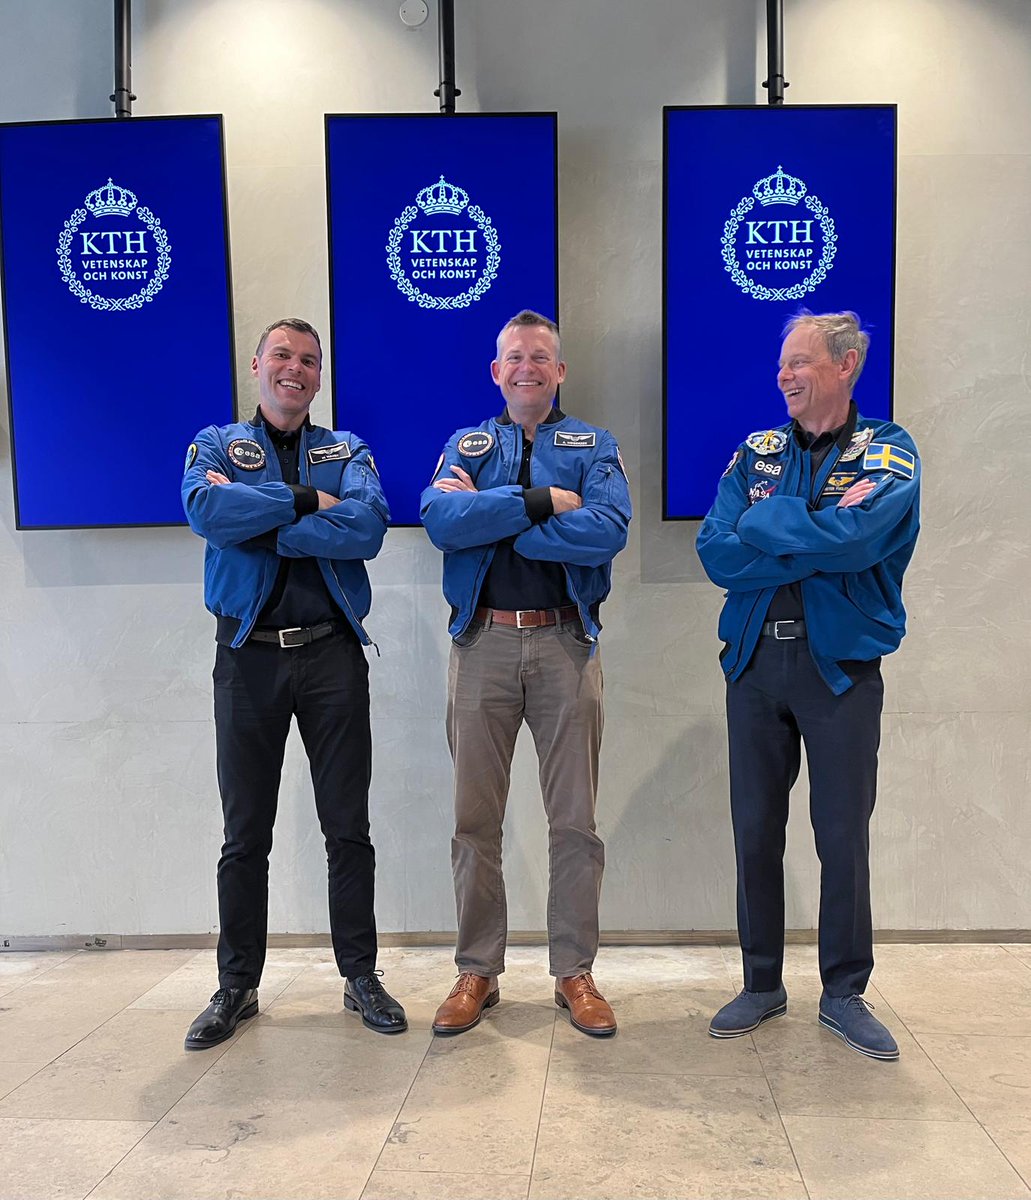 Three astronauts, three @esa generations, one picture. 👨‍🚀👨‍🚀👨‍🚀 @astro_marcus, @Astro_Andreas and @CFuglesang came together before meeting the kings and queens of Sweden and Denmark in Stockholm yesterday. 🇸🇪🇩🇰 The astronauts discussed how space research and technology can help